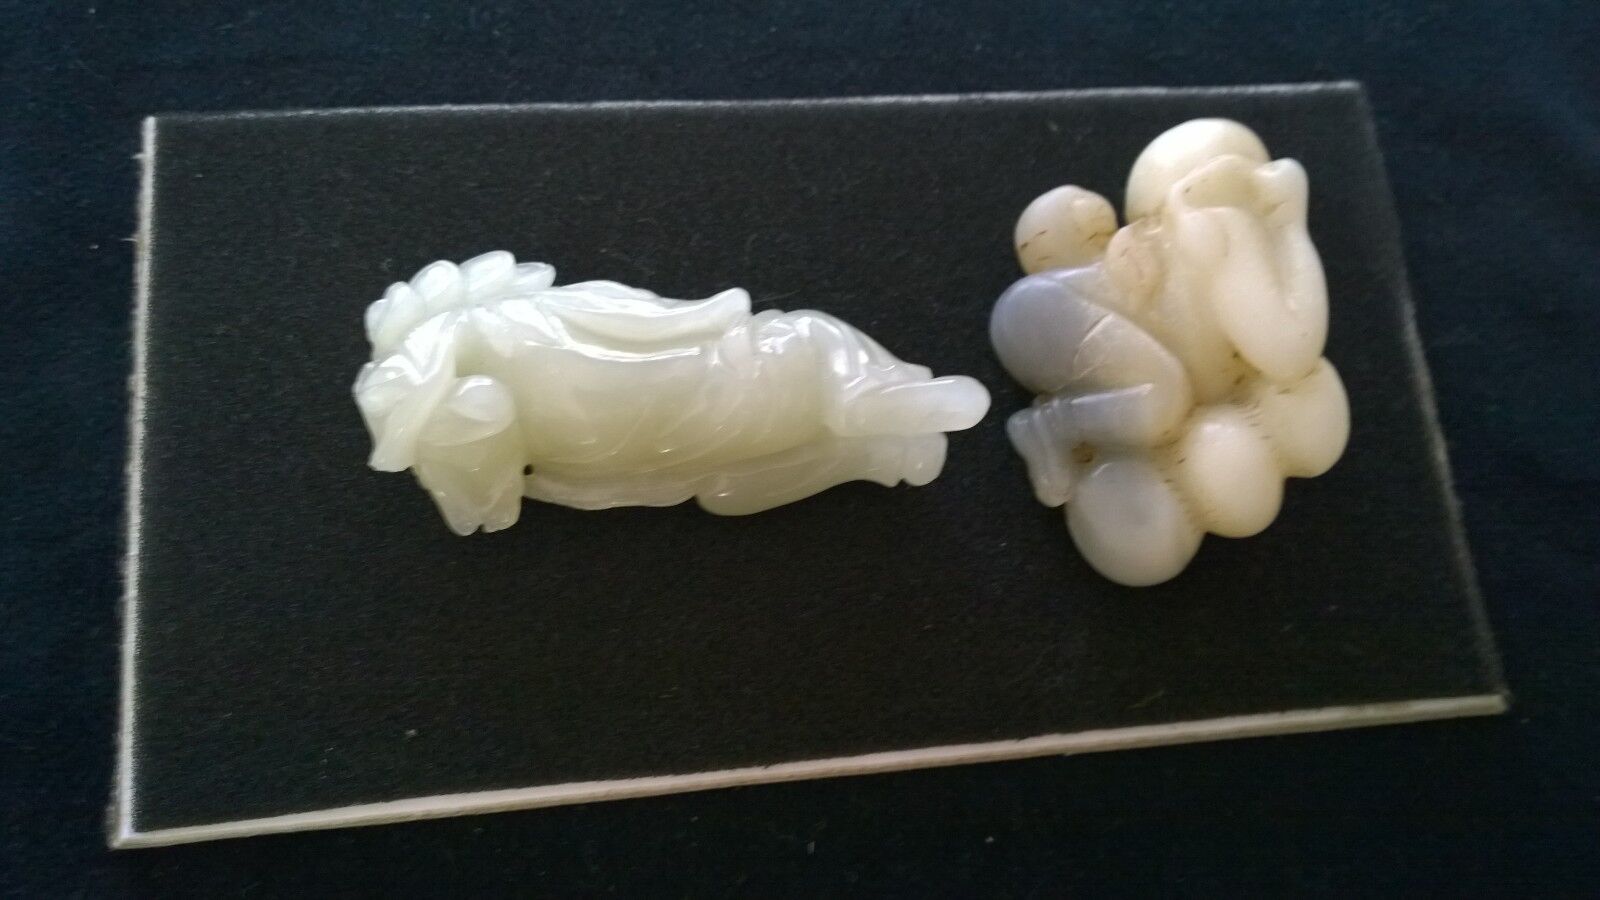 Group of Two (2)Nephrite Jade Lucky Wealth Babies w/Coins and Fruits Amulets. Без бренда - фотография #2